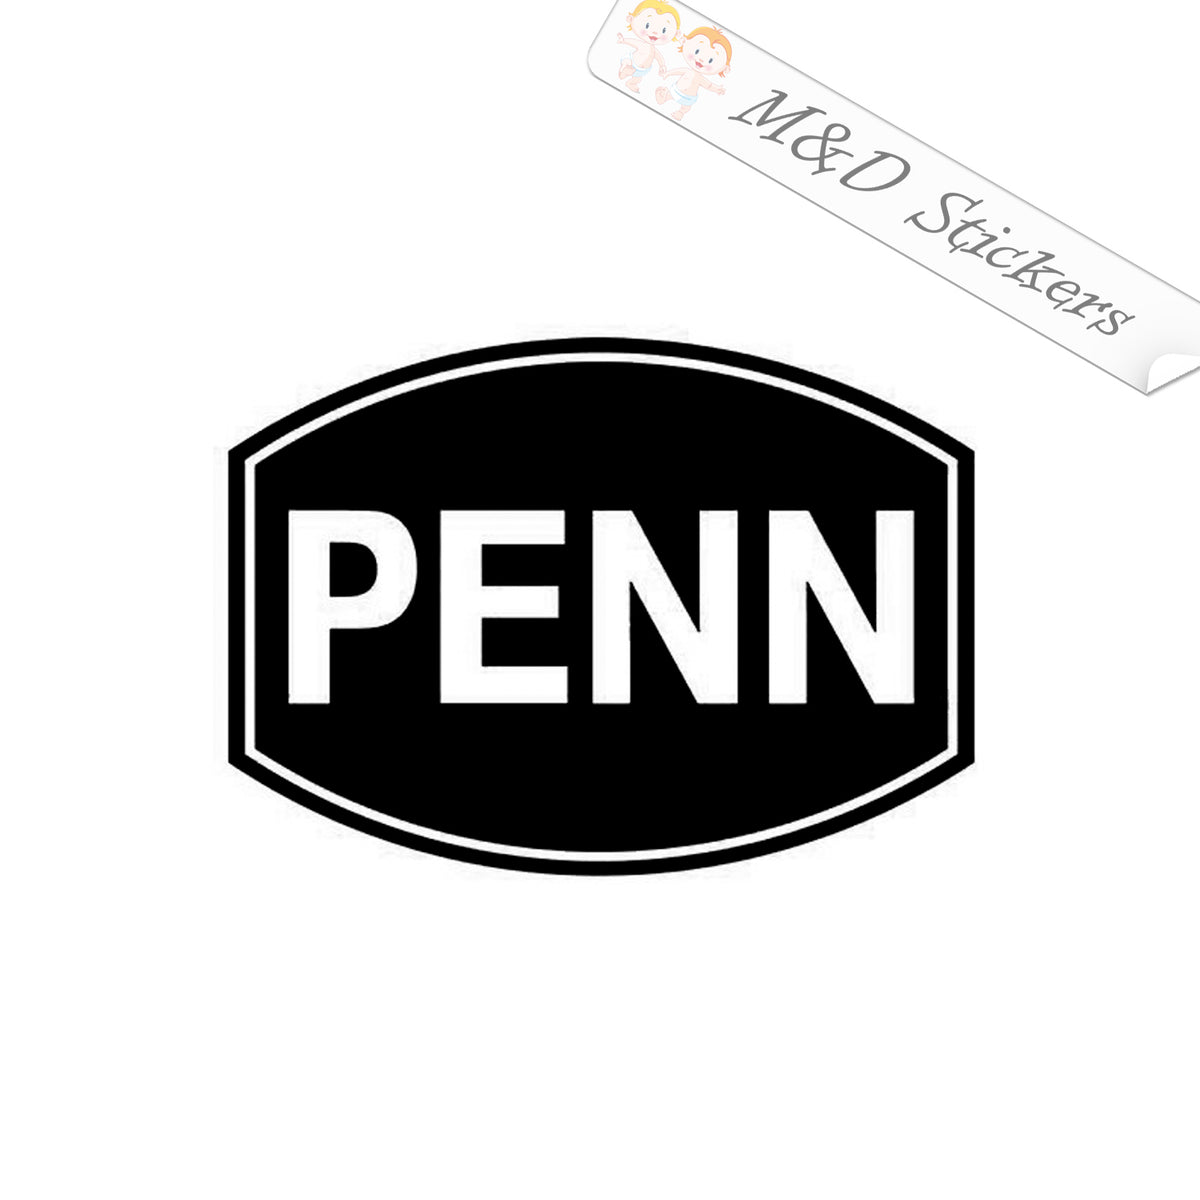 2x Penn Fishing Rods Vinyl Decal Sticker Different colors & size for